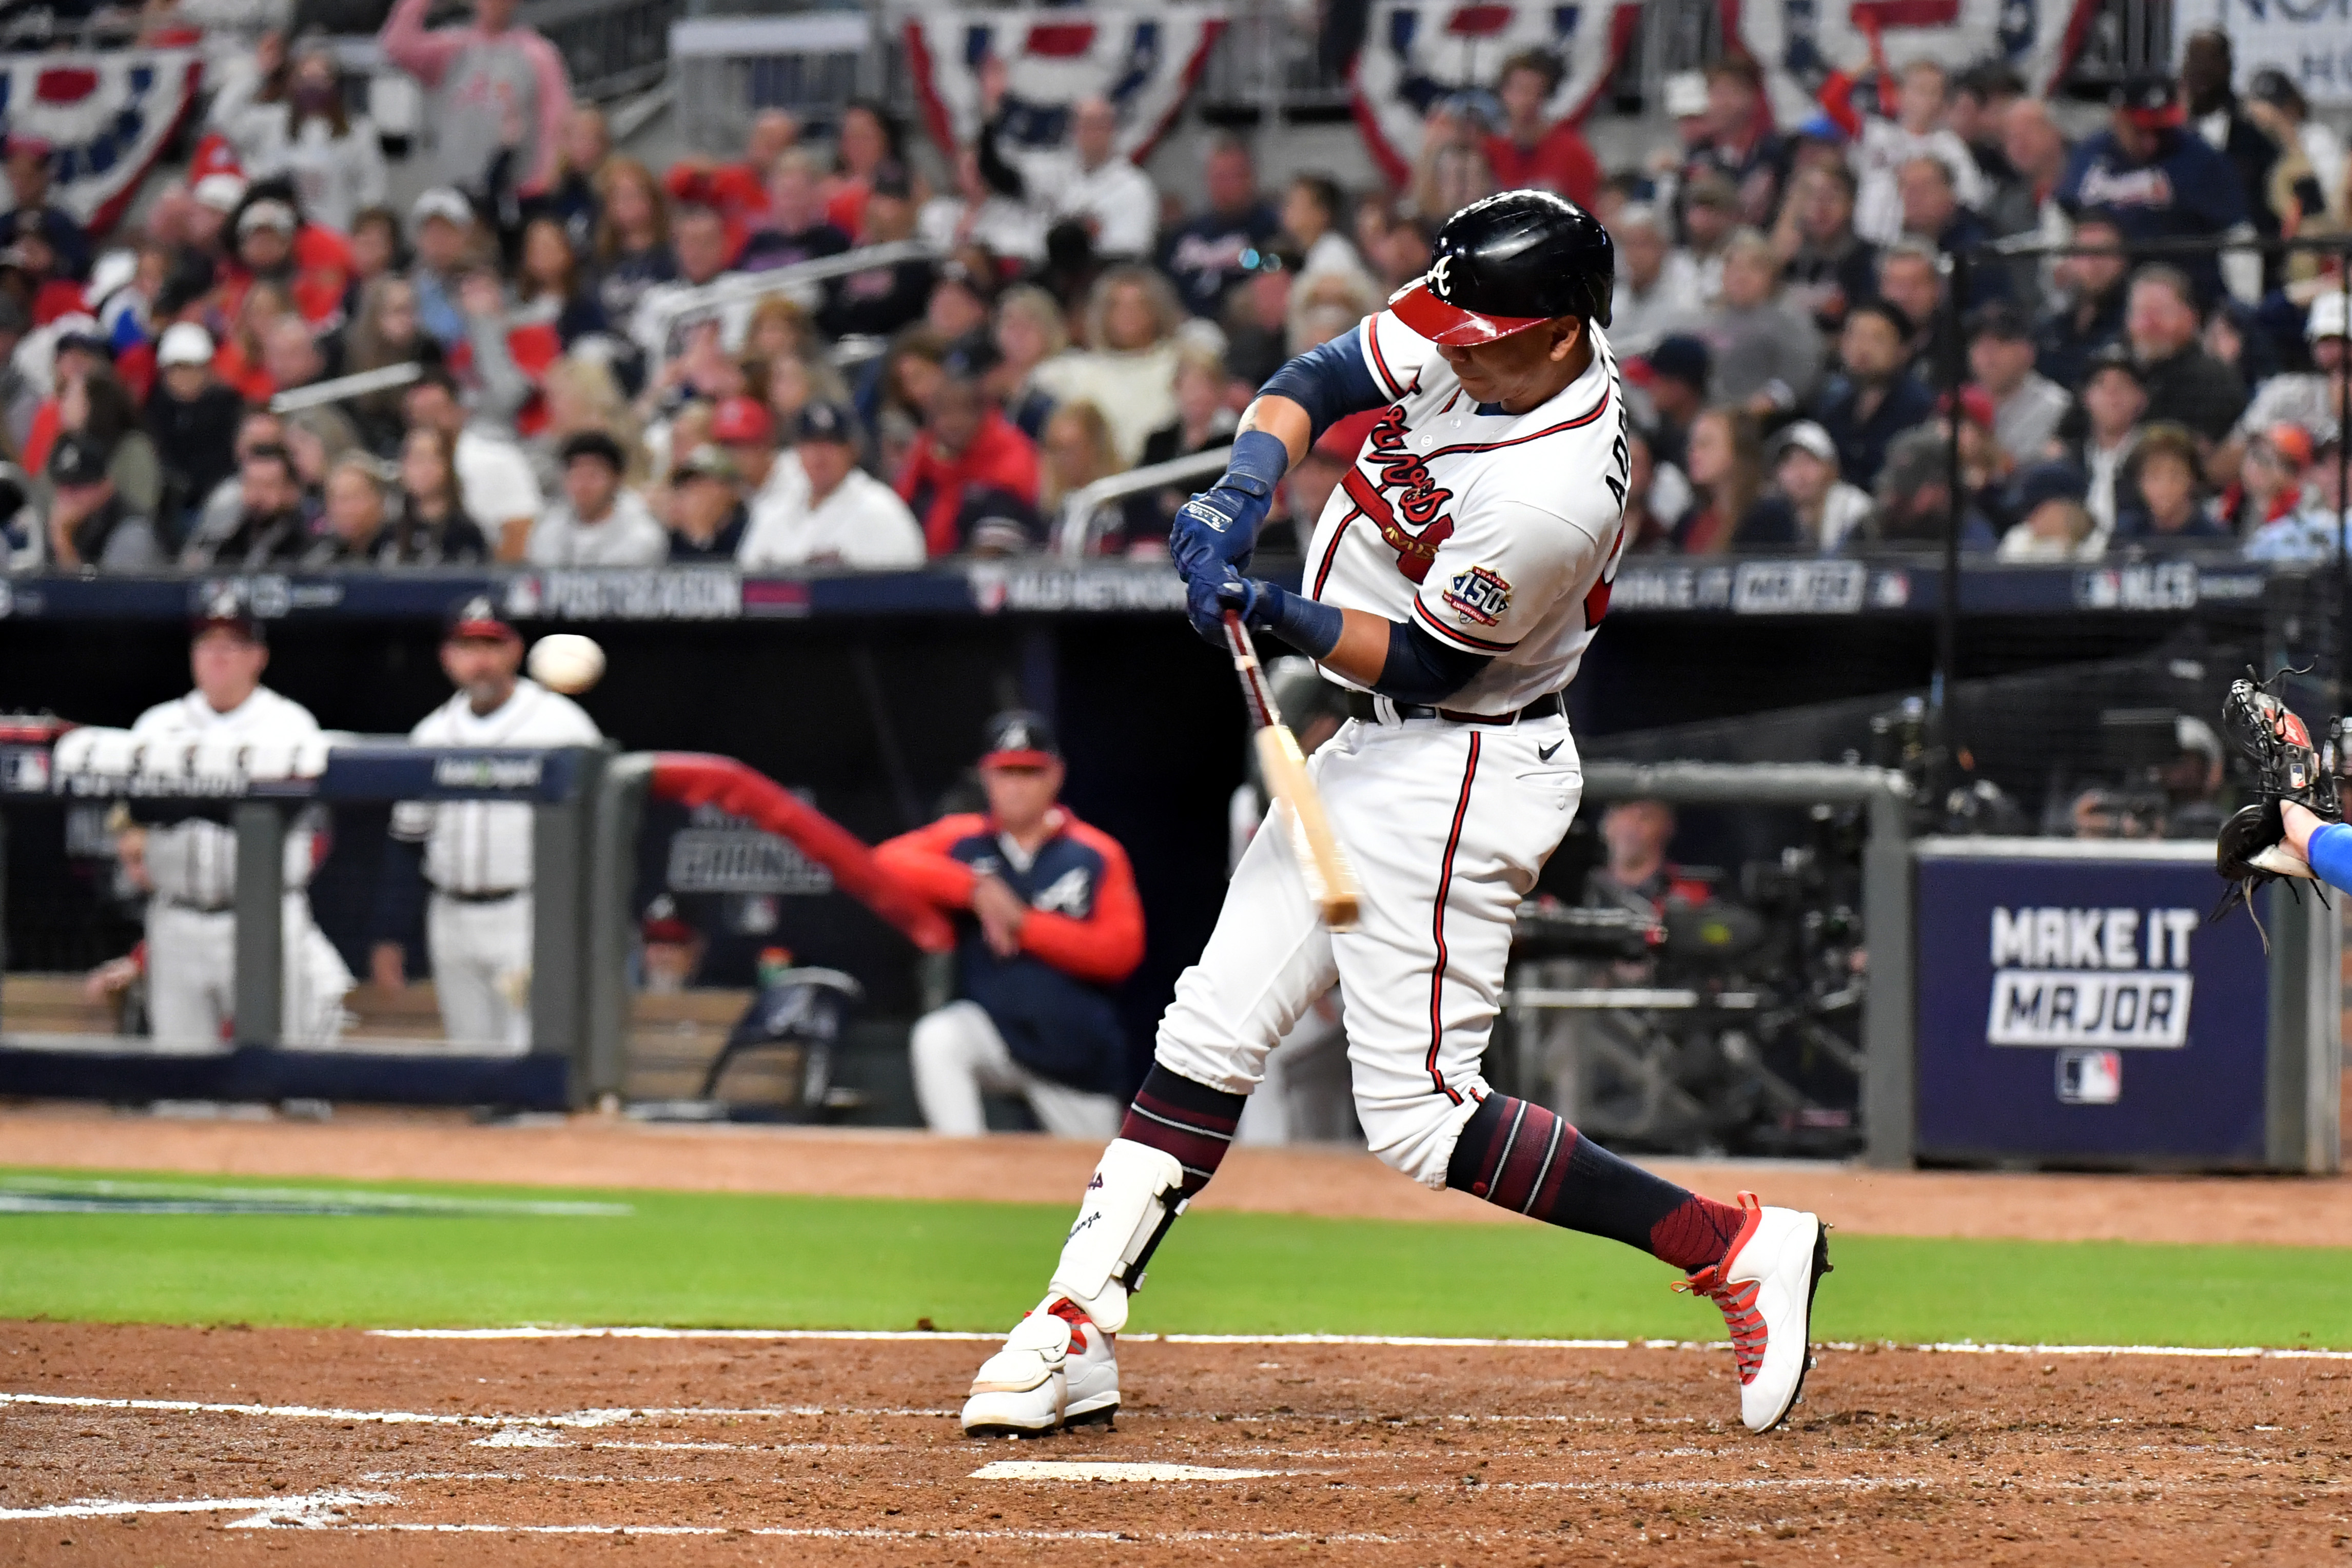 Veteran Adrianza returns to Braves in trade with Nationals